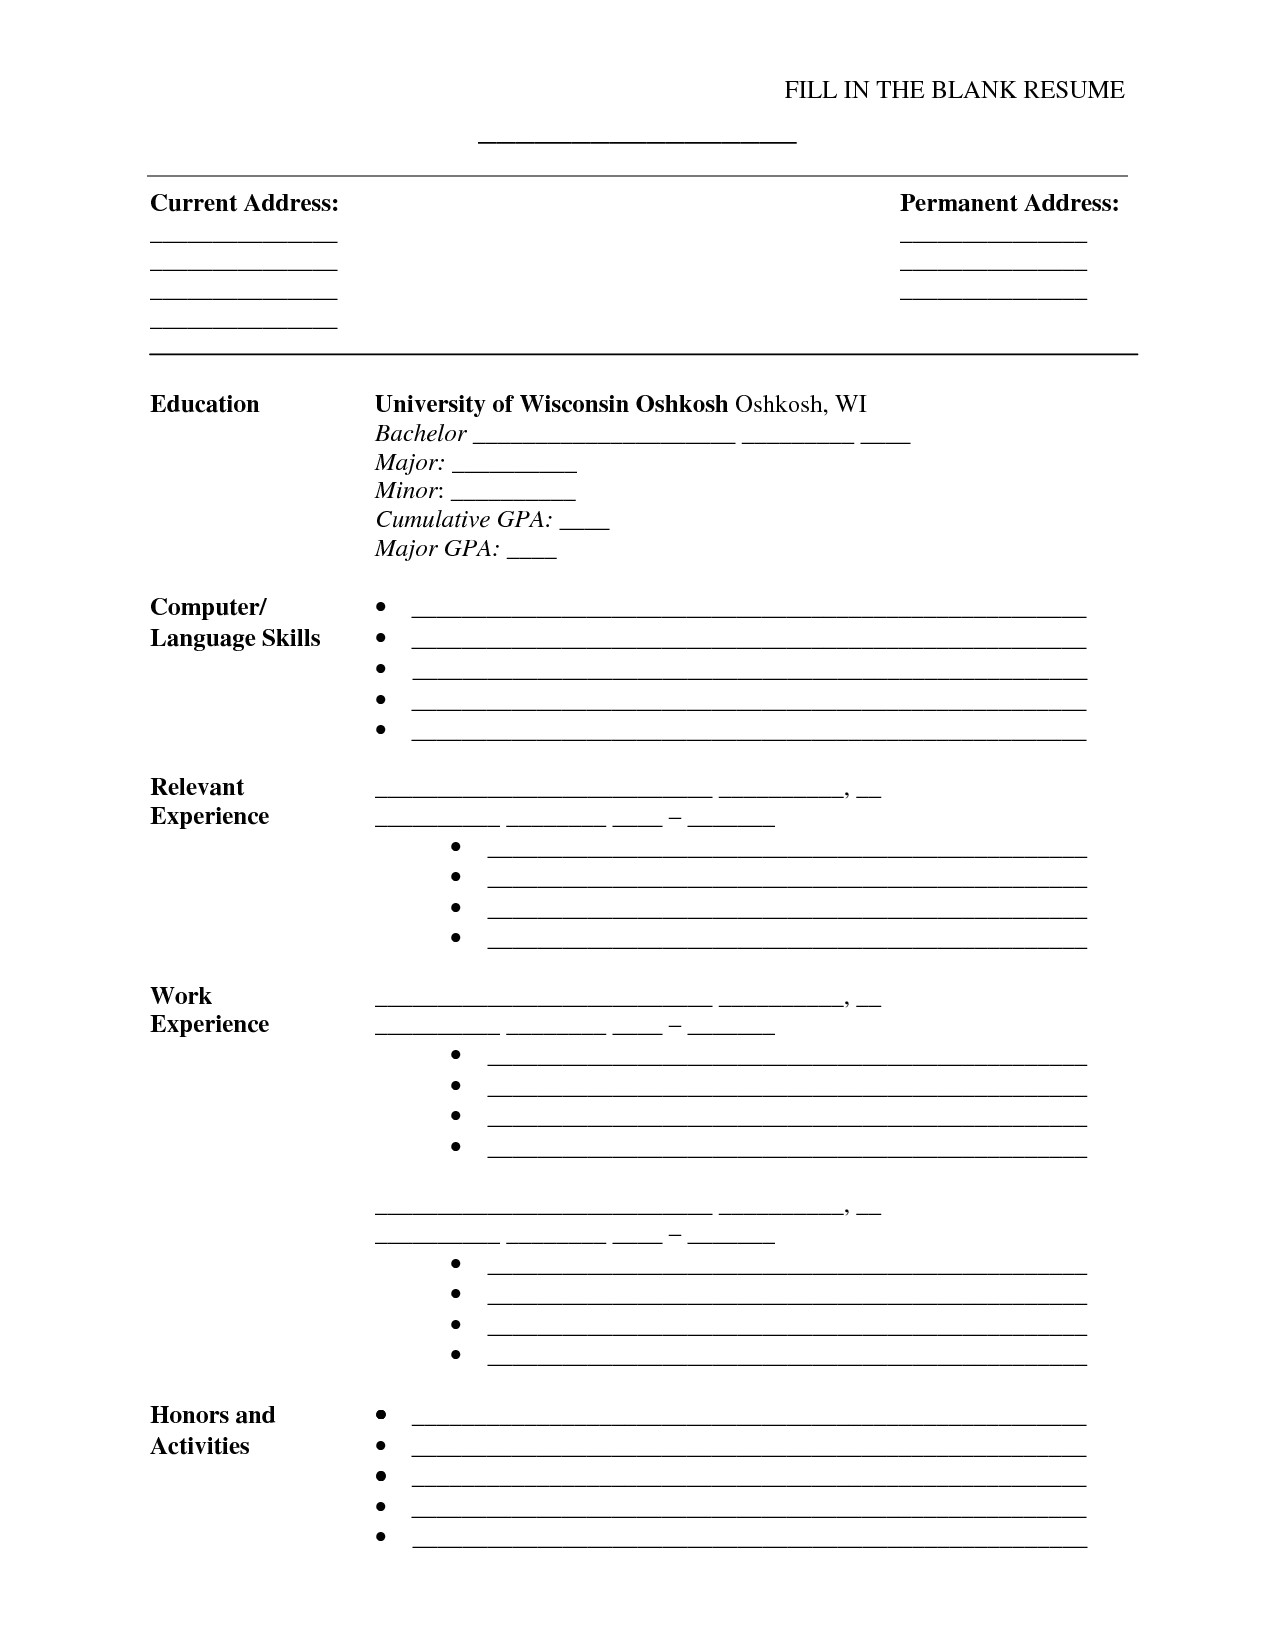 Fill In the Blank Resume for Students Fill In the Blank Resume Pdf Http Www Resumecareer